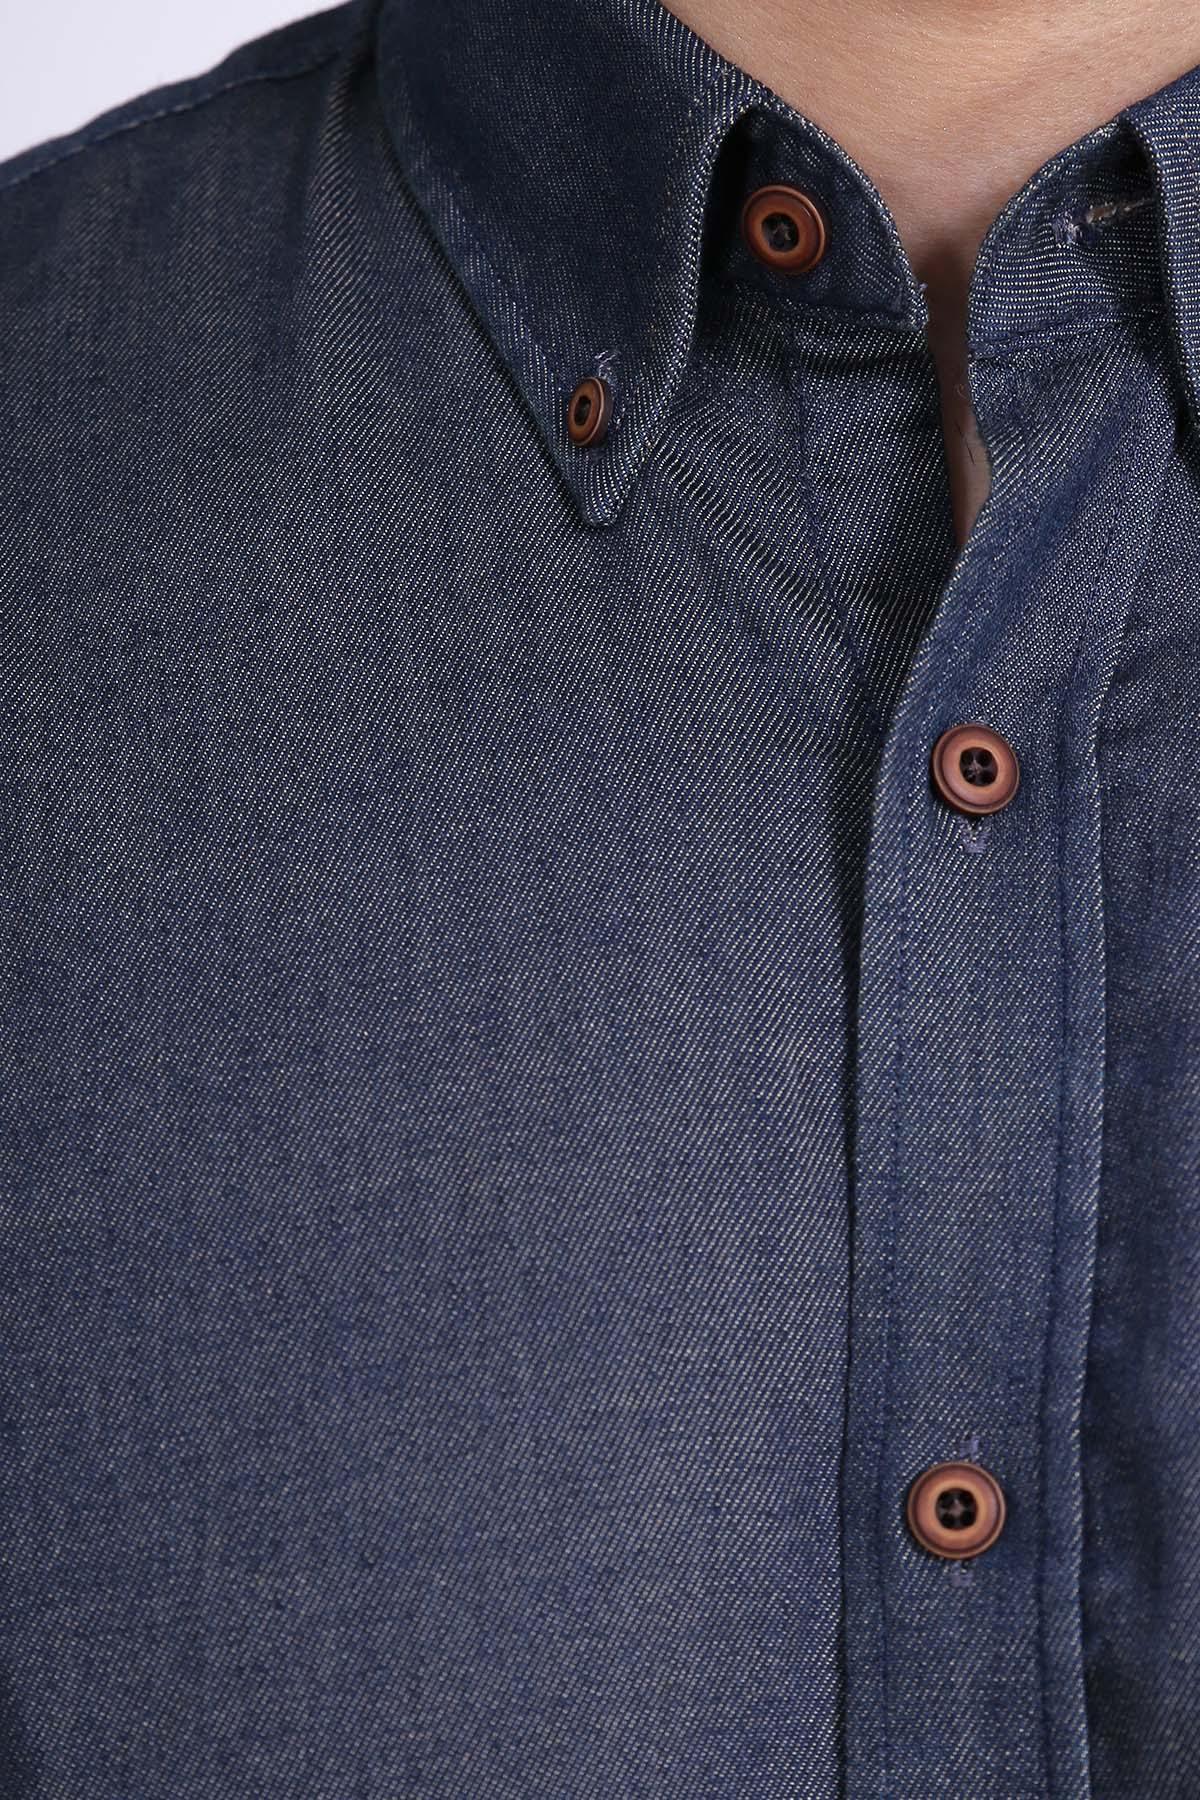 SMART SHIRT FULL SLEEVE BUTTON DOWN DENIM BLUE at Charcoal Clothing